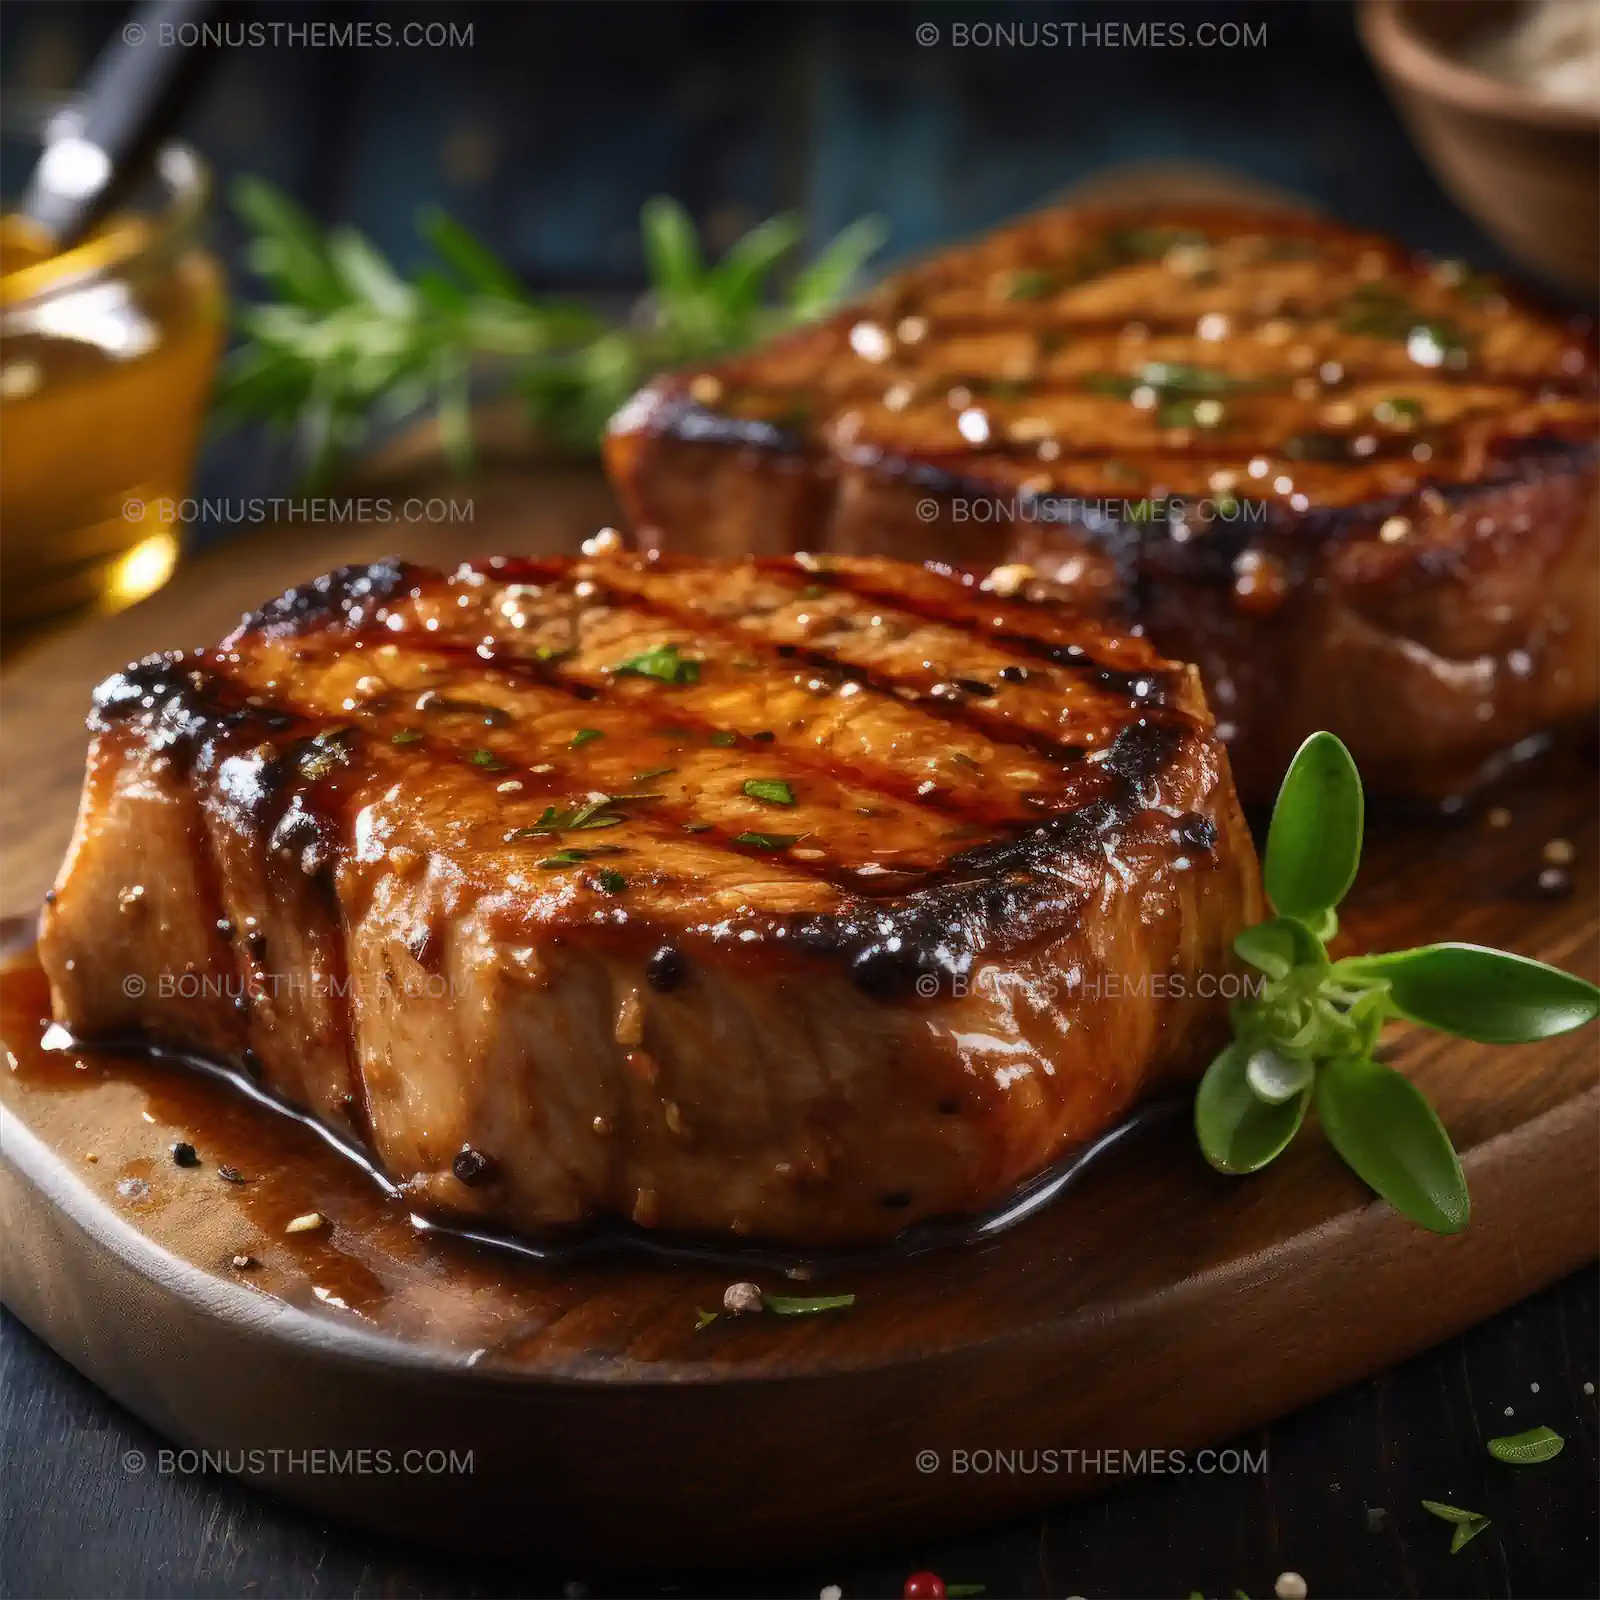 Grilled pork chops on a wooden plate